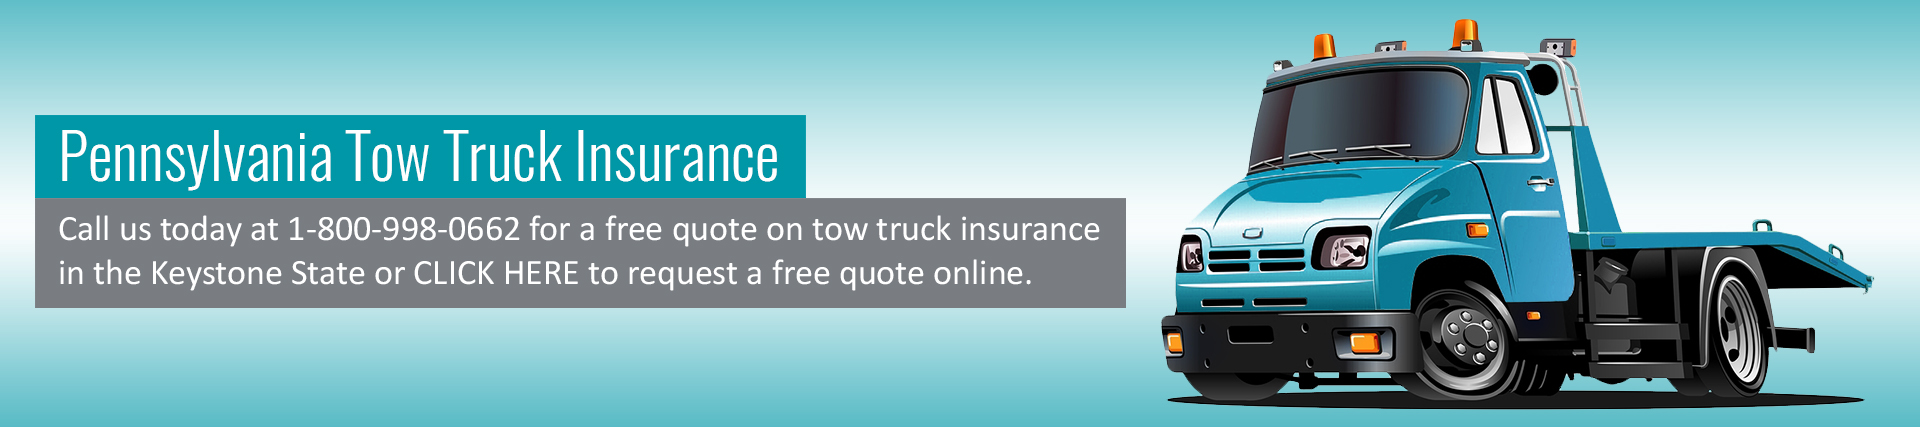 Tow Truck Insurance PA